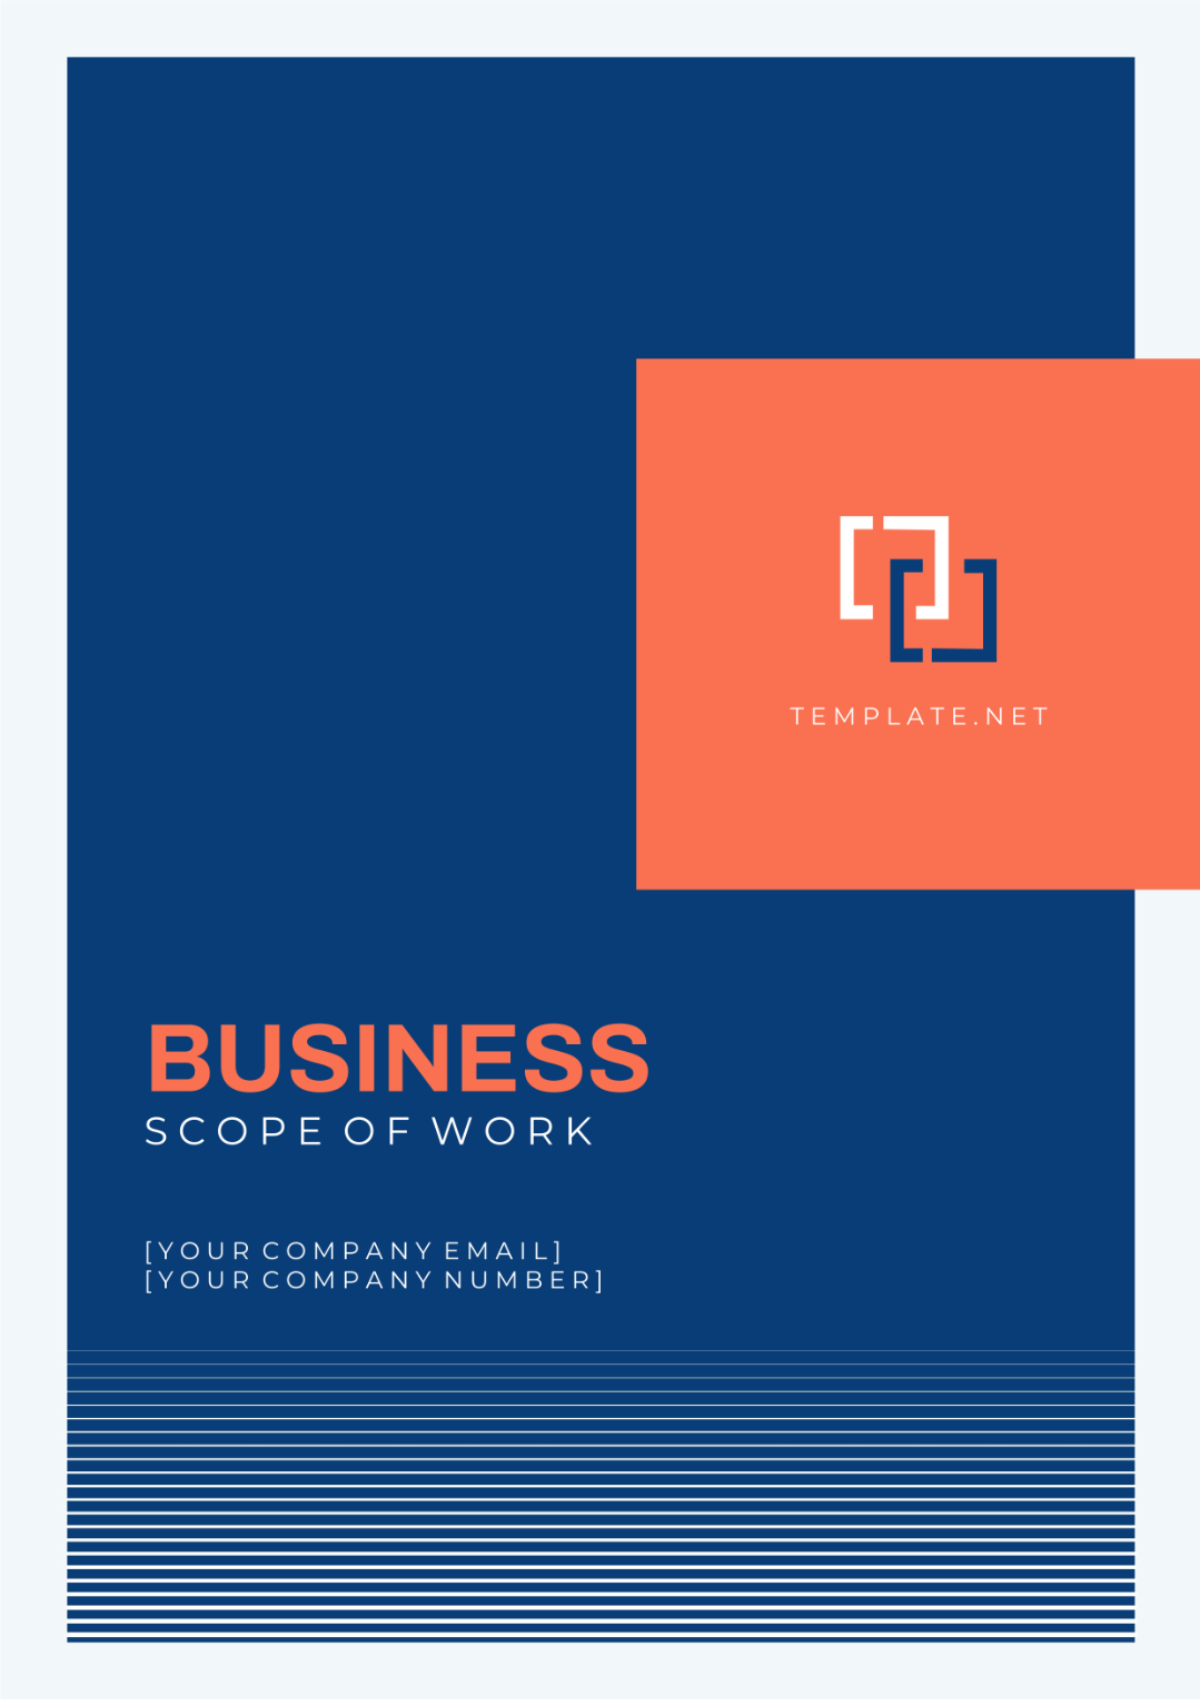 Business Scope of Work Template